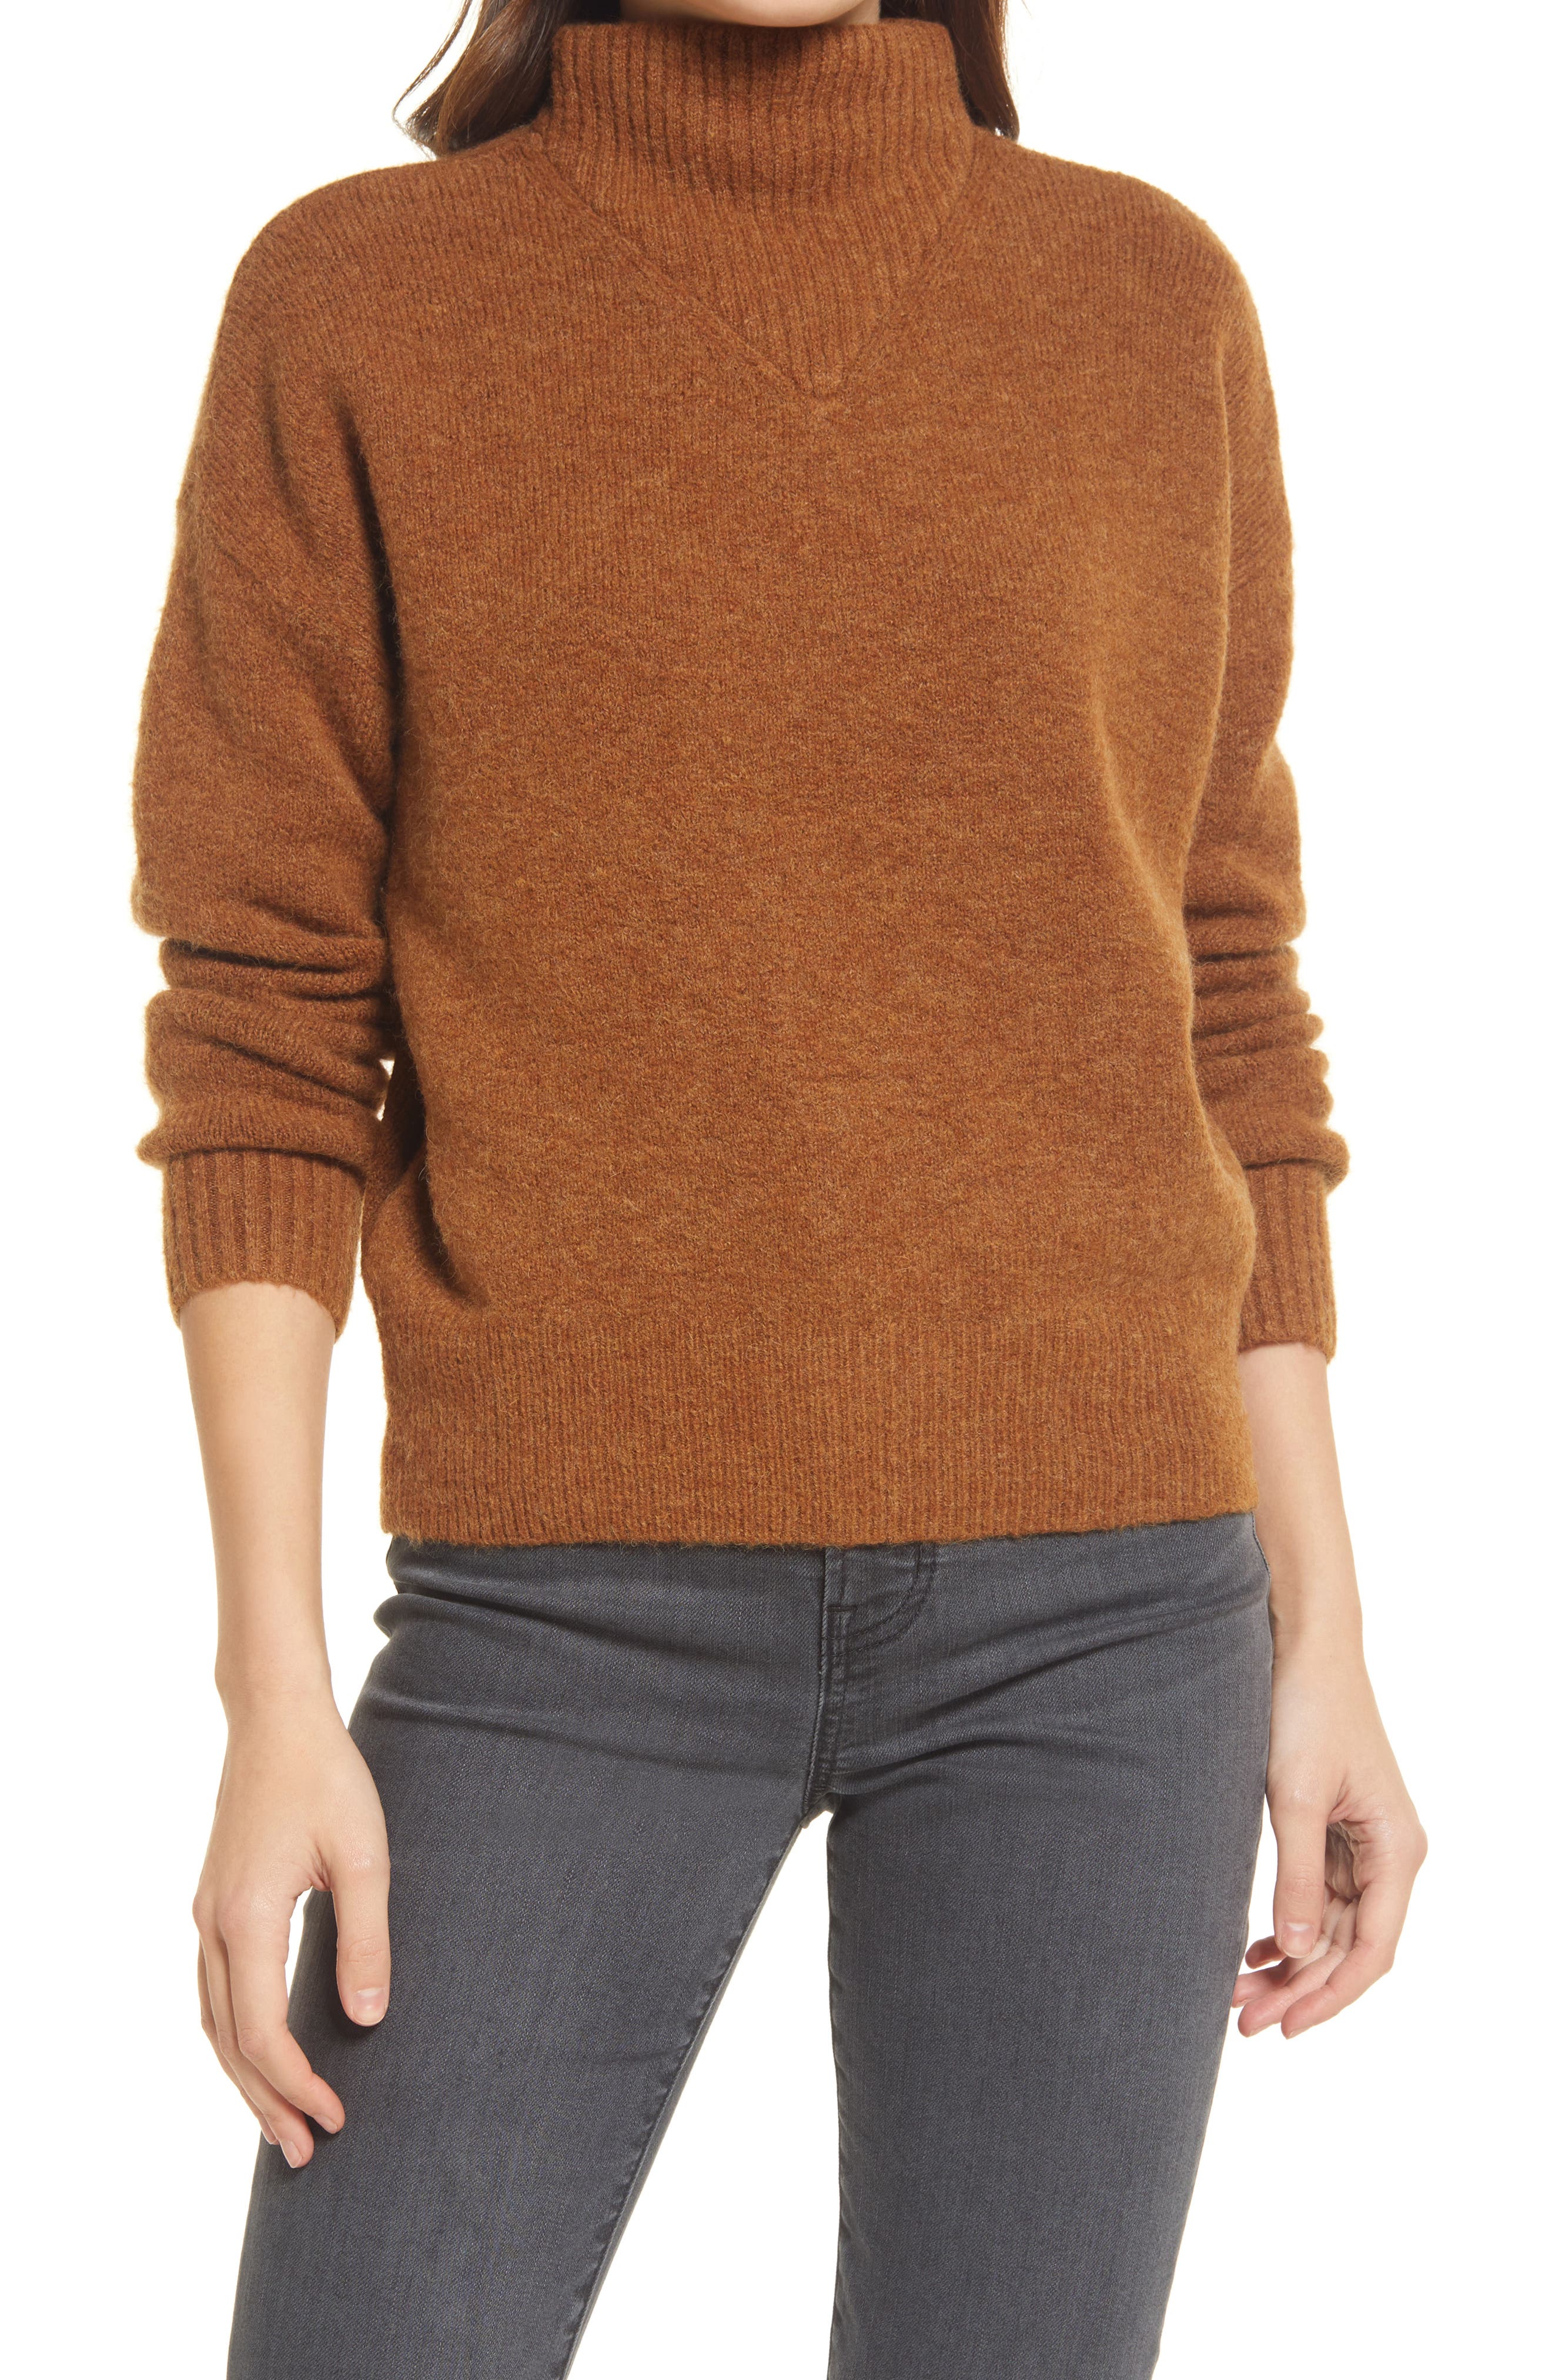 Madewell Dillon Mock Neck Pullover ...